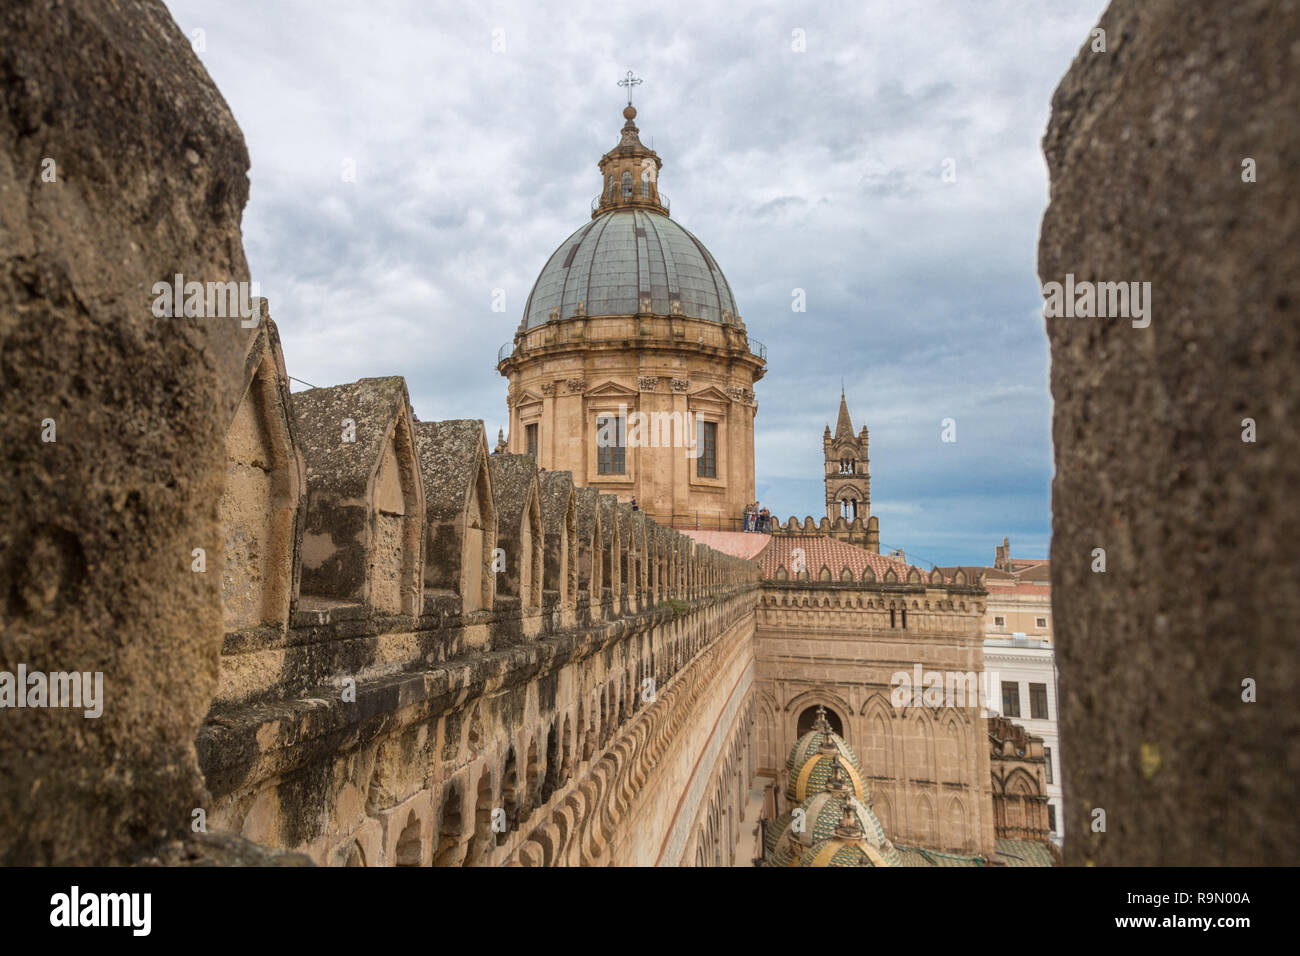 Palermo Cathedral (Metropolitan Cathedral of the Assumption of Virgin Mary) in Palermo, Sicily, Italy. Architectural complex built in Norman, Moorish, Stock Photo